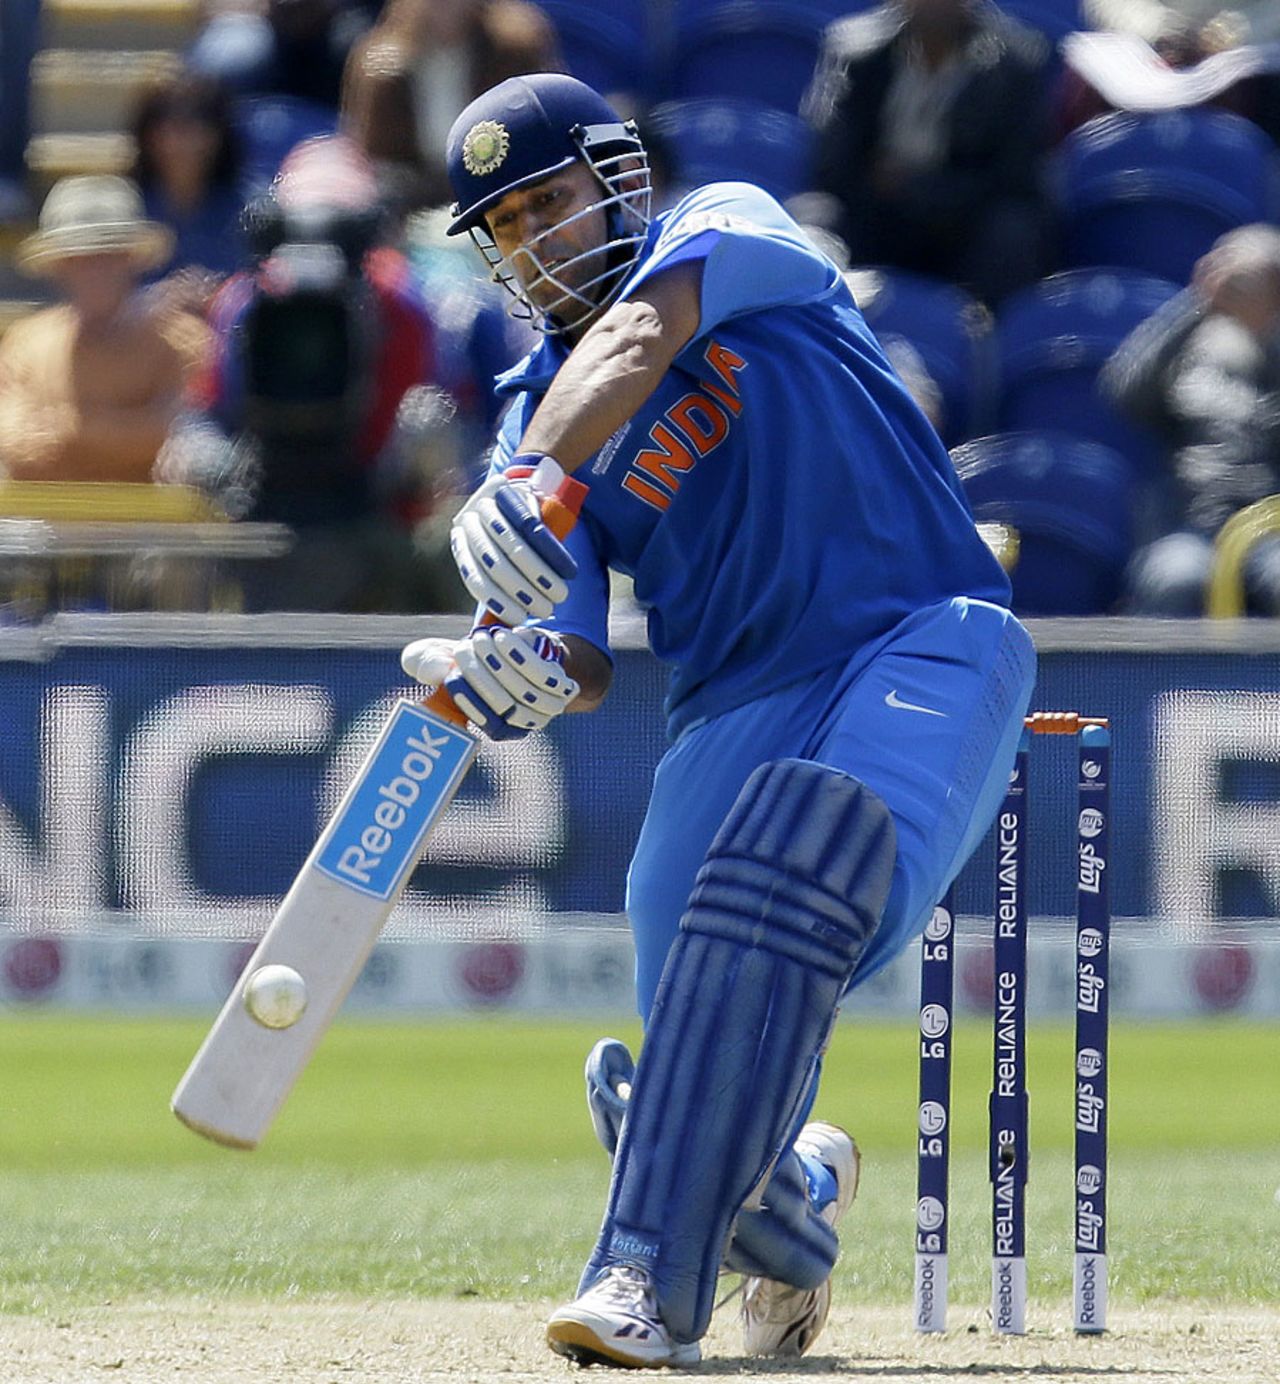 MS Dhoni hit a quick 27, India v South Africa, Champions Trophy, Group B, Cardiff, June 6, 2013